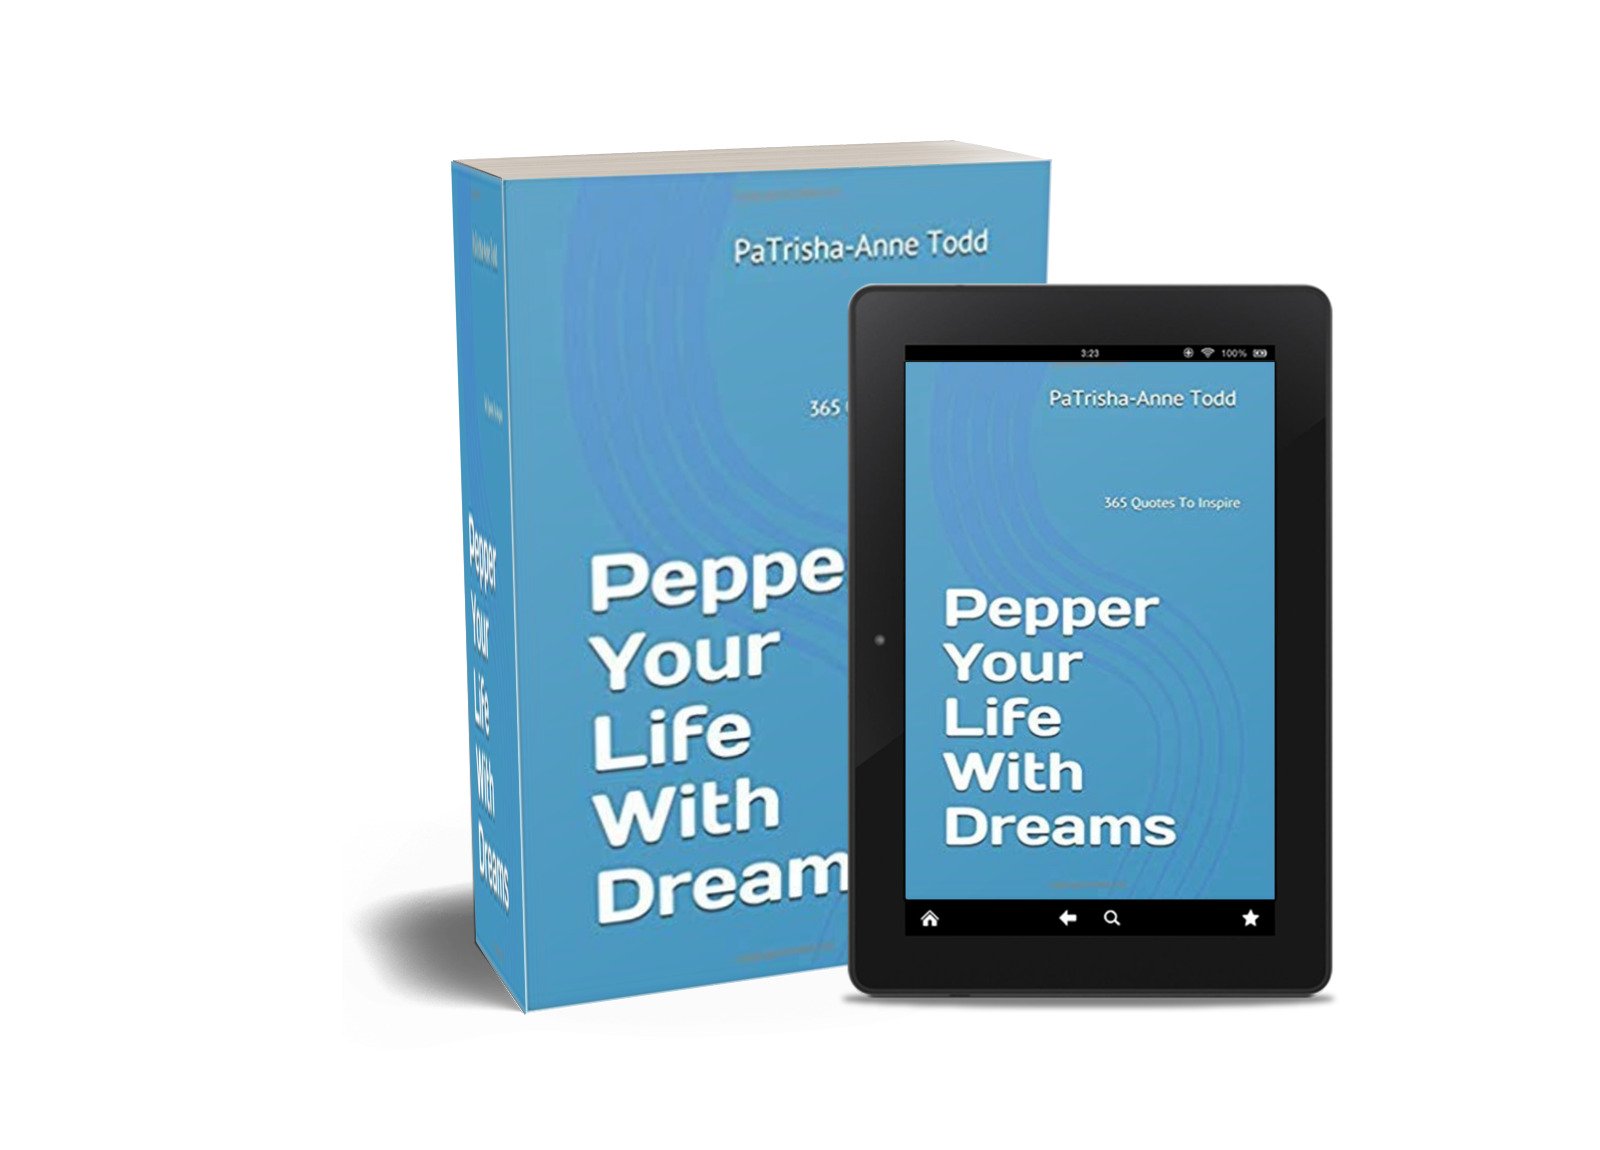 Pepper Your Life with Dreams by PaTrisha-Anne Todd